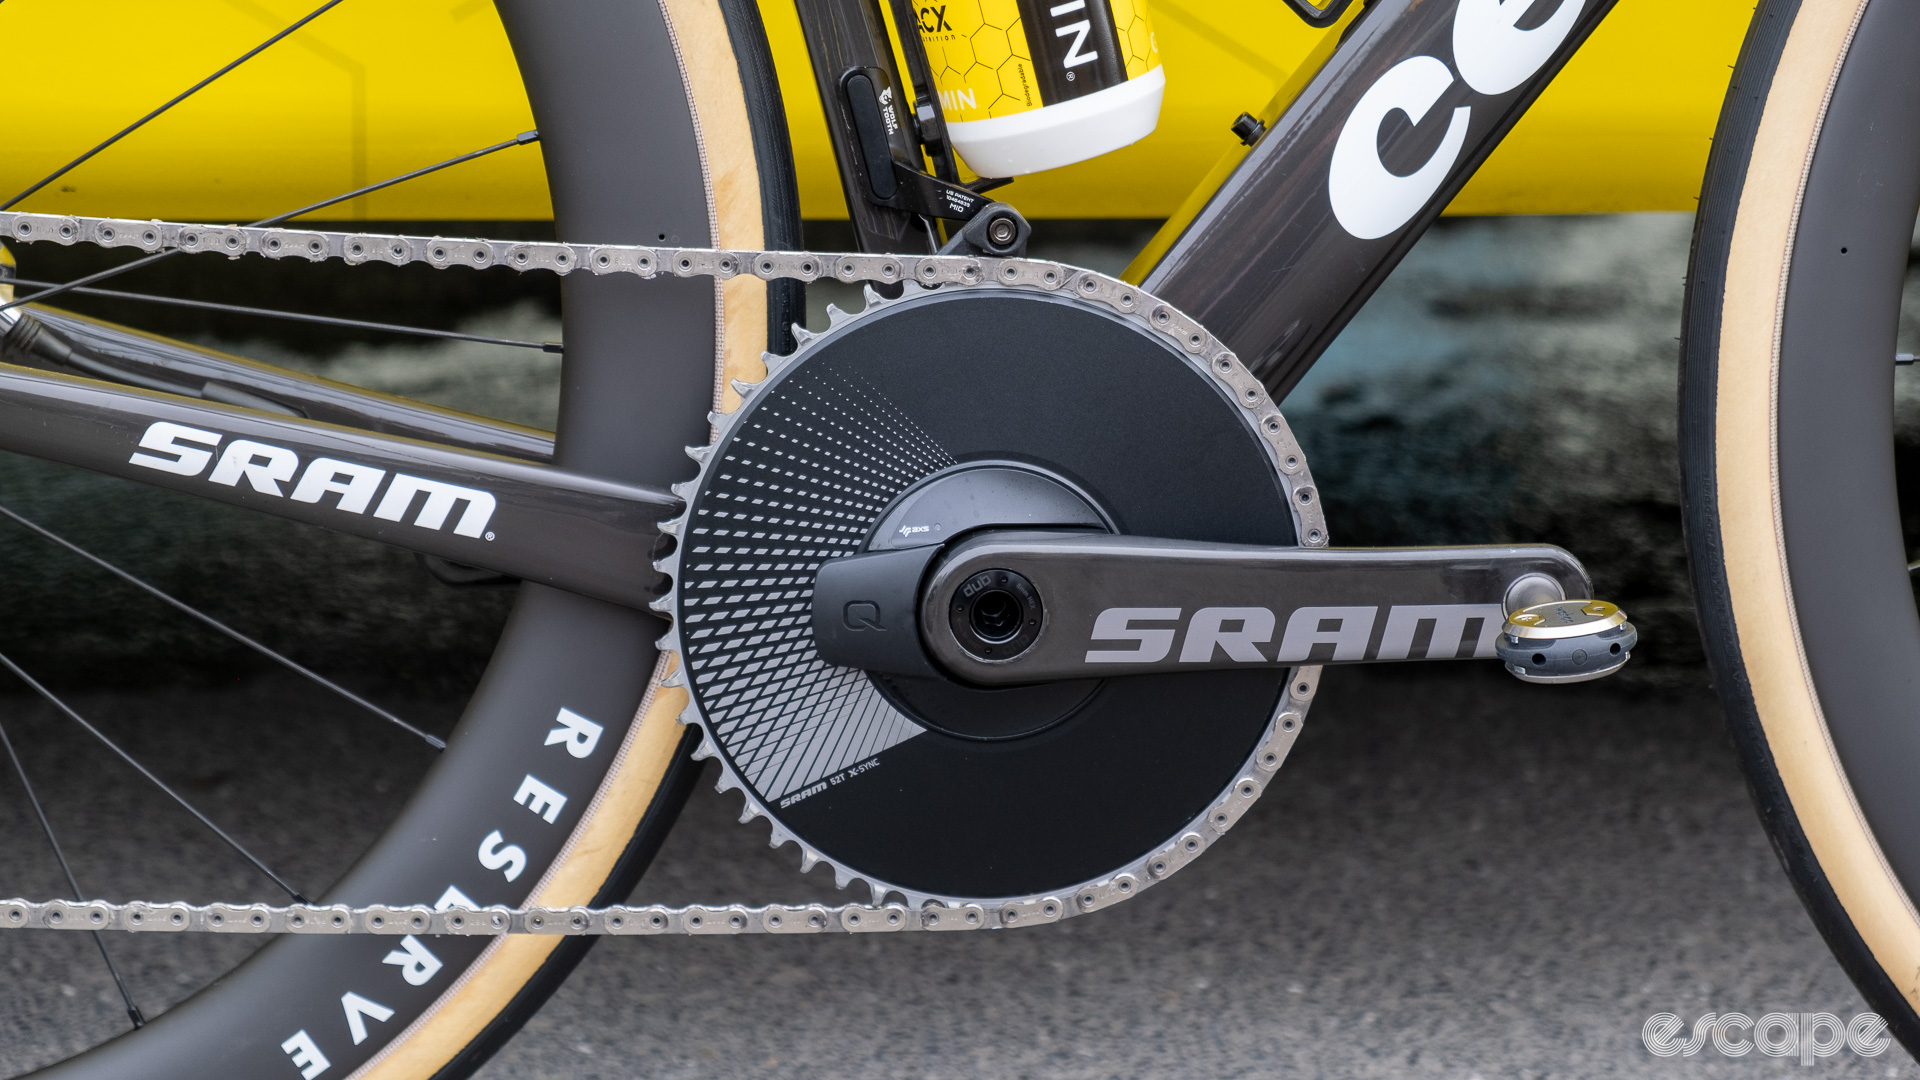 The image shows the crank and pedal on Marianne Vos' Cervelo Soloist.